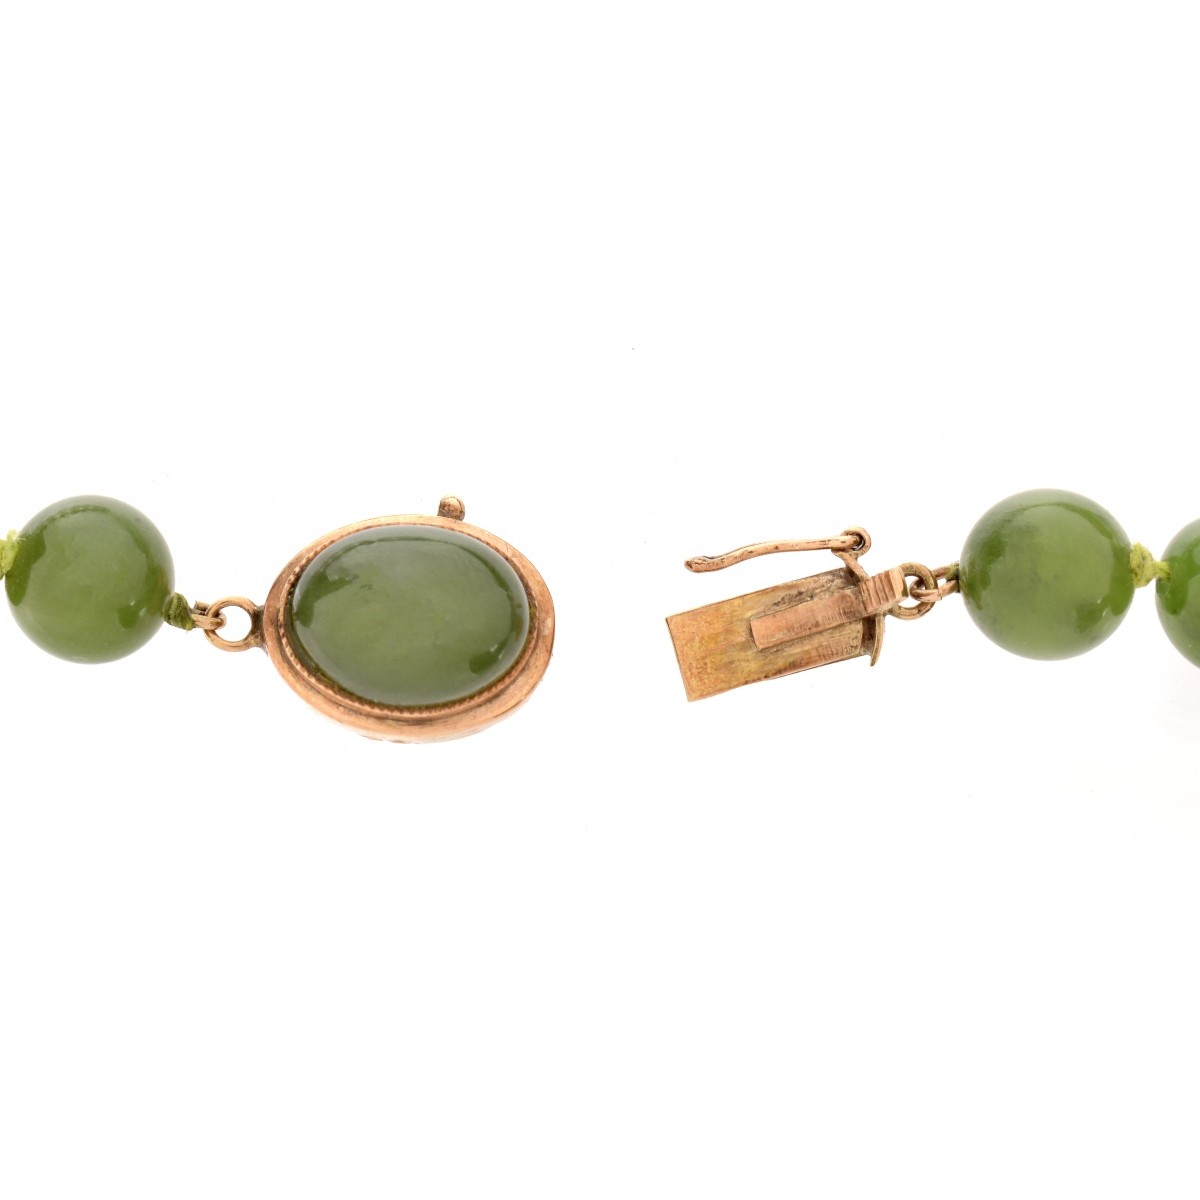 Antique Jade Bead and 14K Necklace